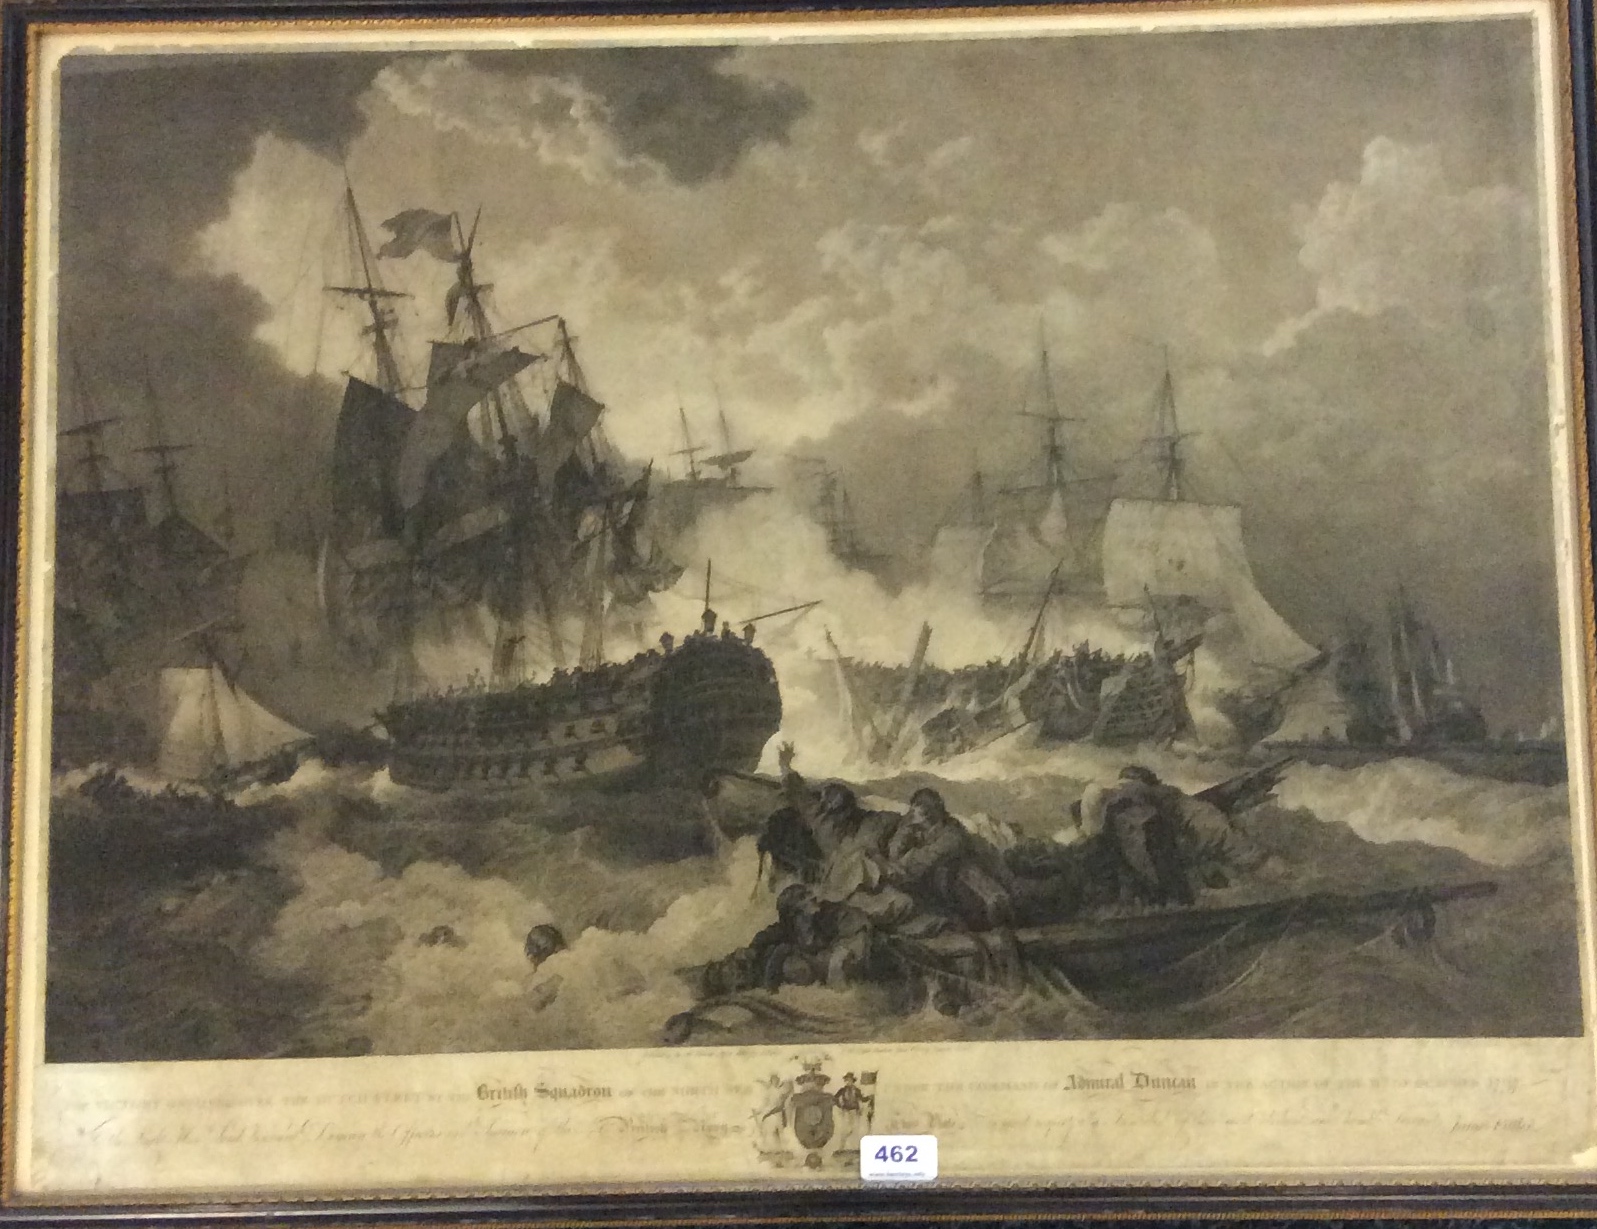 Early 19th c Fittler print of a 1797 sea battle with the Dutch by Admiral Duncan lacking plate